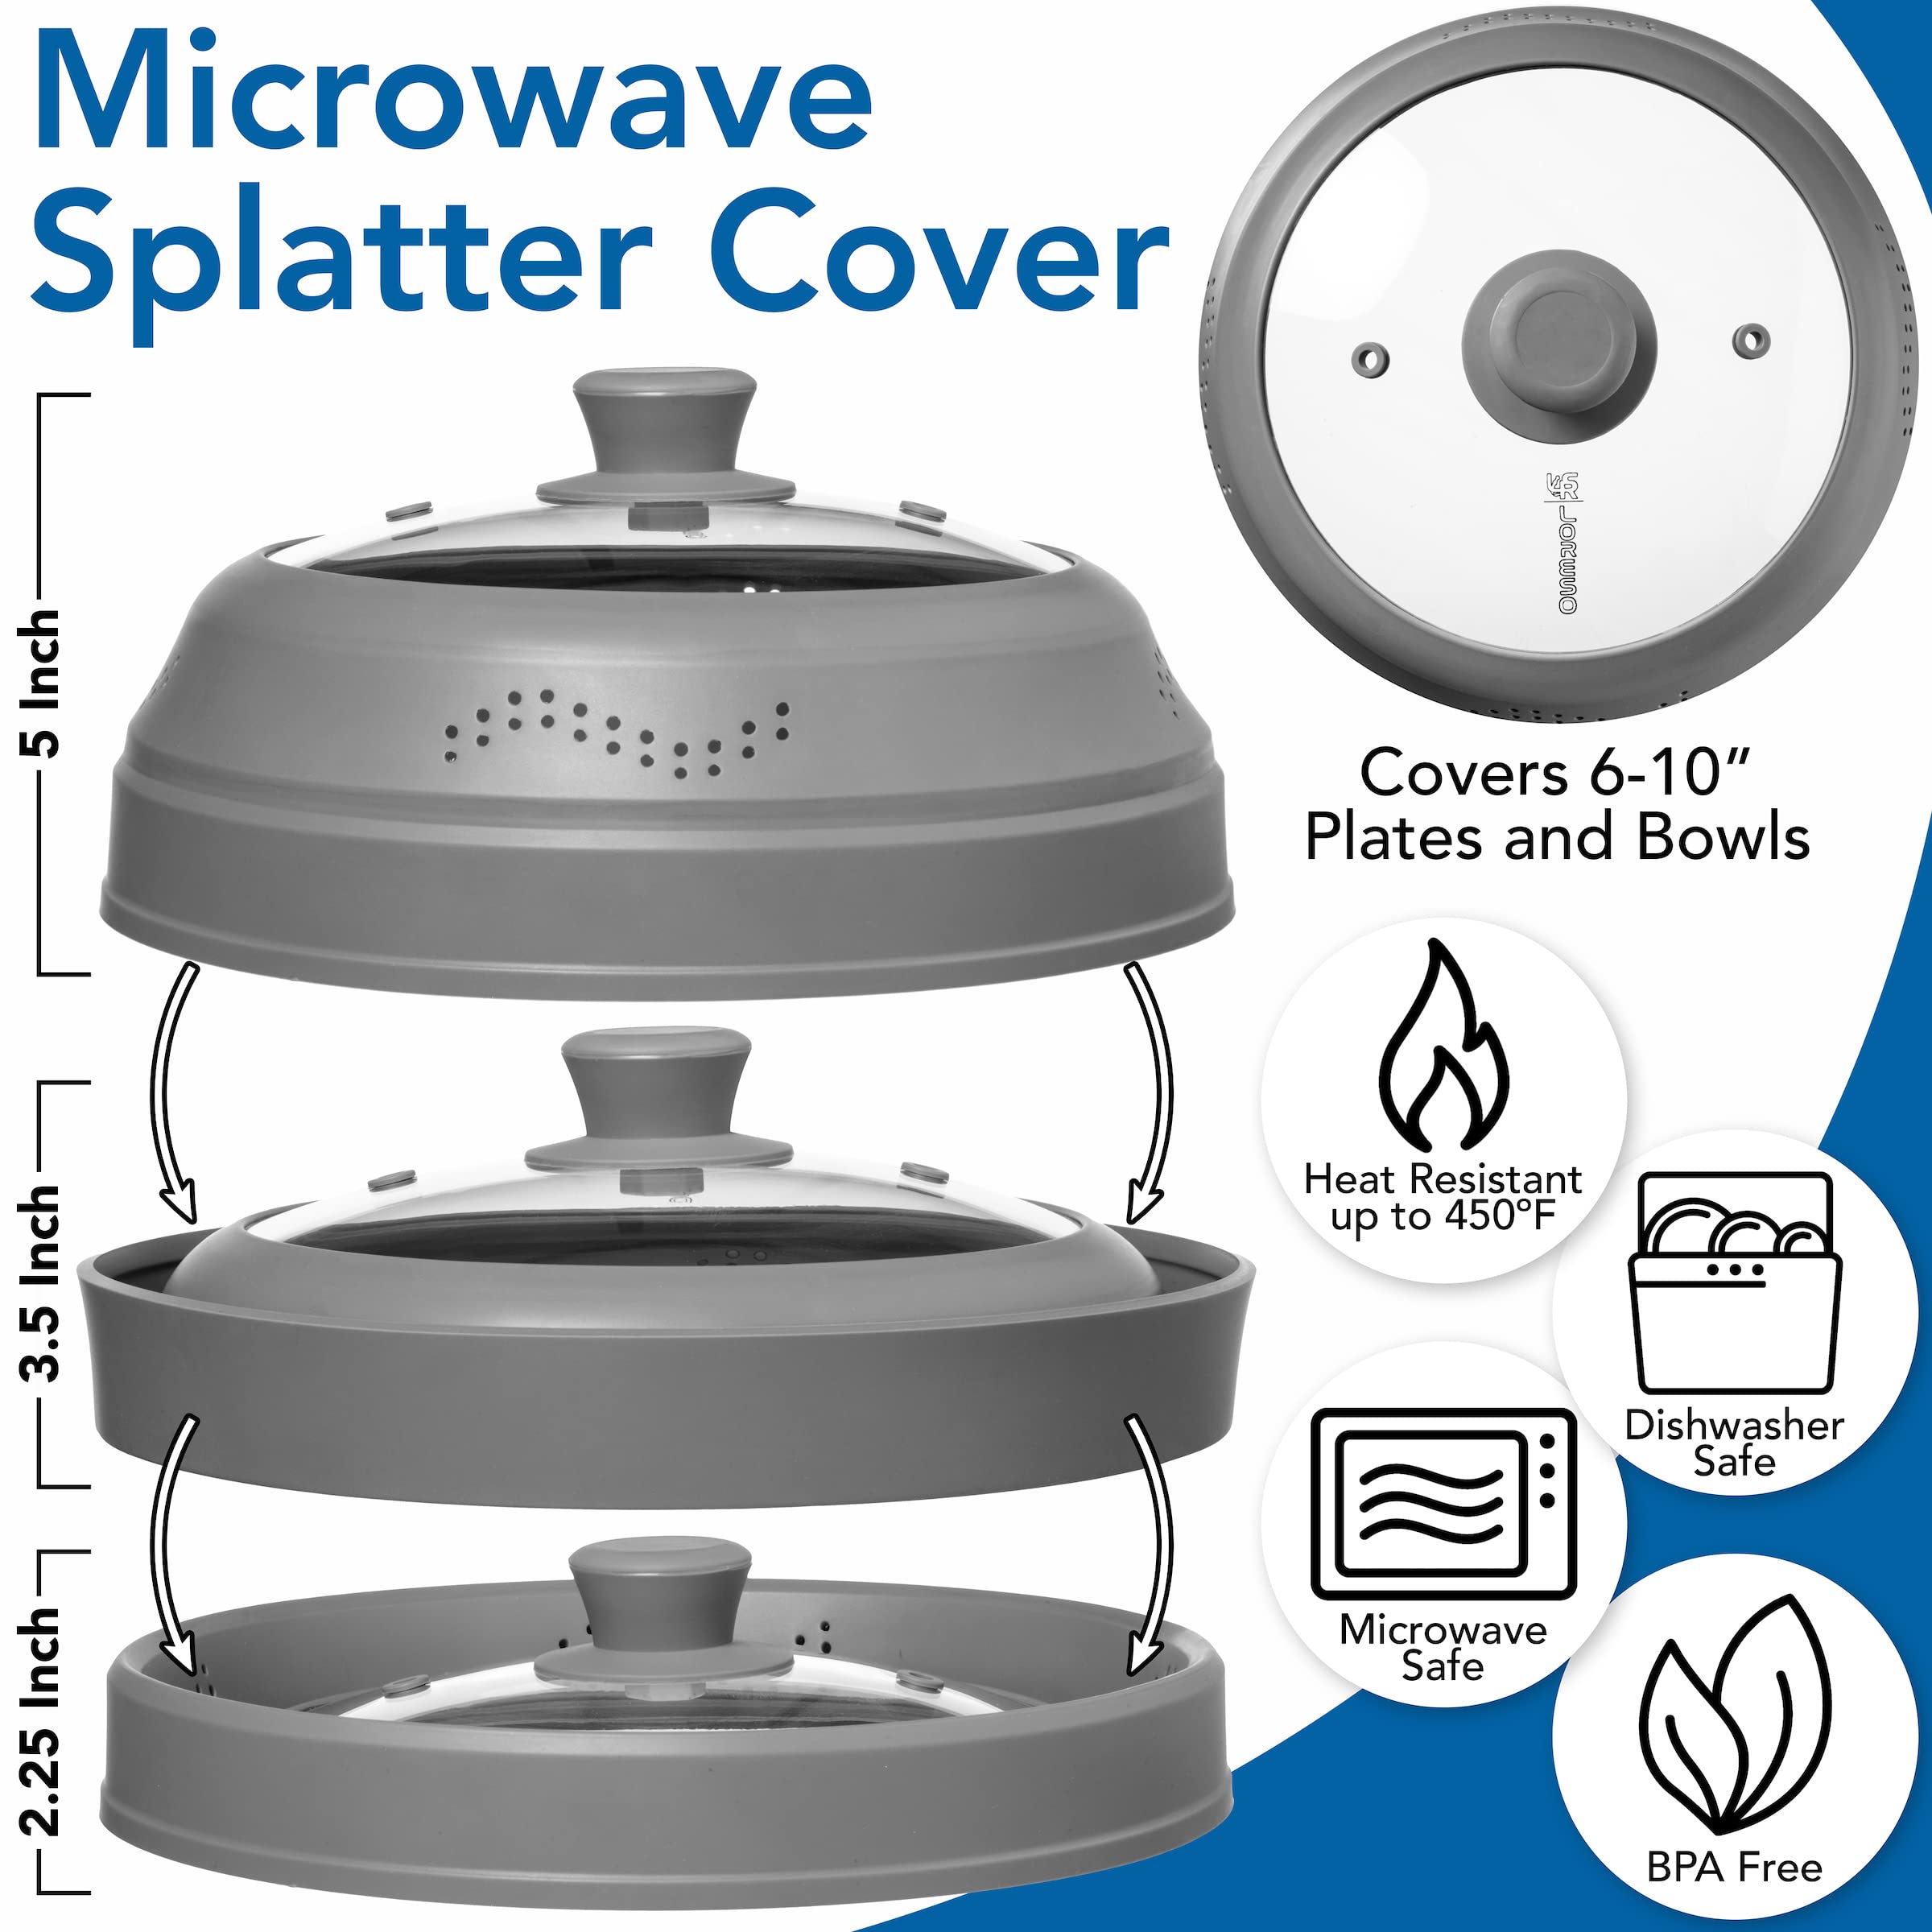 LSR LORESO Microwave Splatter Food Cover - Heat Resistance Clear Glass, Vented Silicone Guard with Grip Handle, Collapsible Dish Cover Blocks Popping Grease and Foods